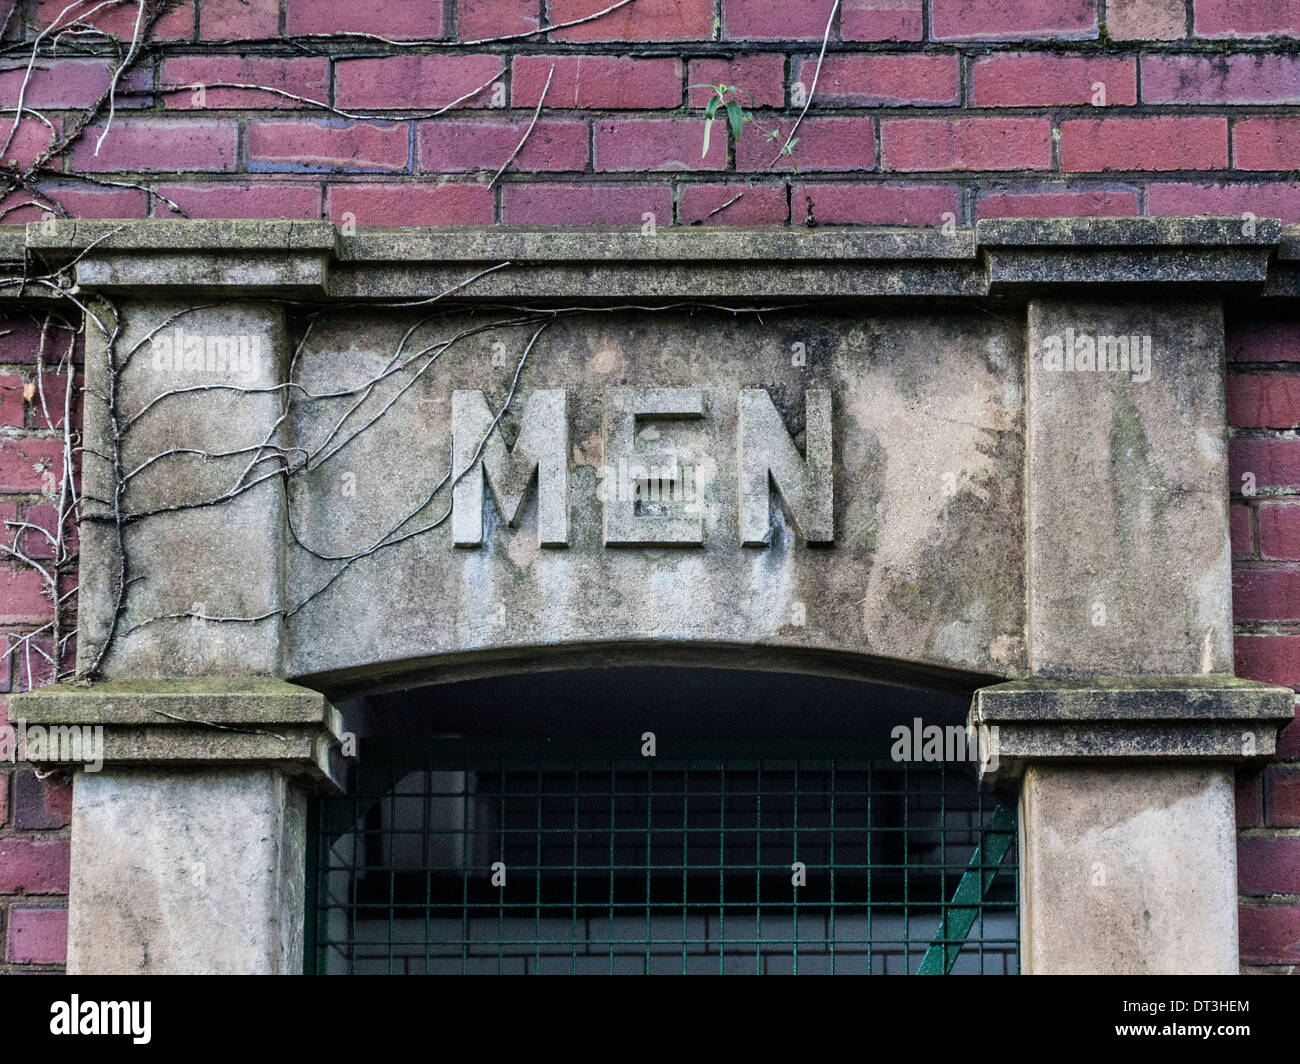 Disused mens toilet door enterance at local park with green mesh fencing Stock Photo